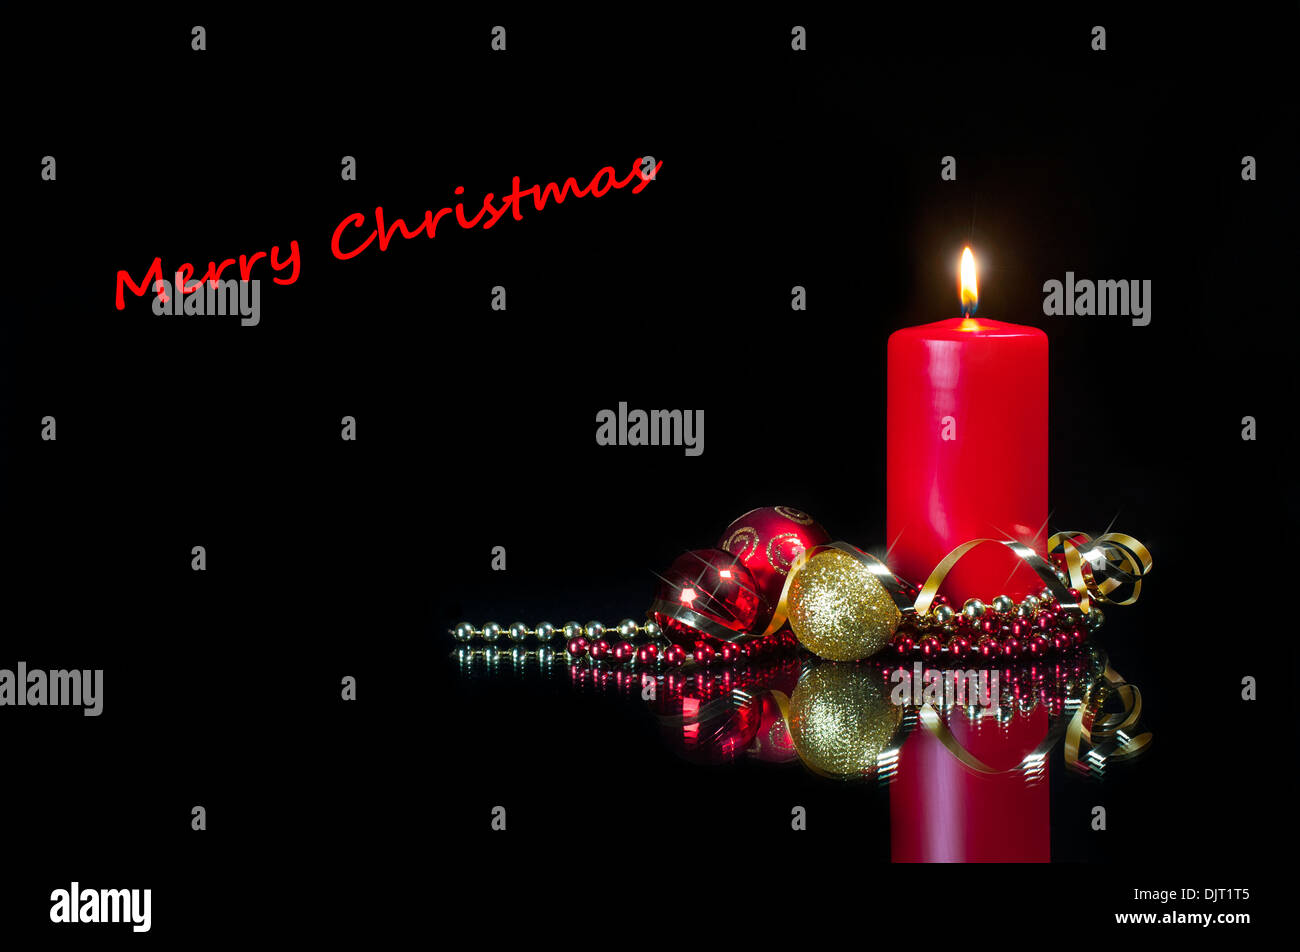 Christmas card picture - red candle and decorations Stock Photo